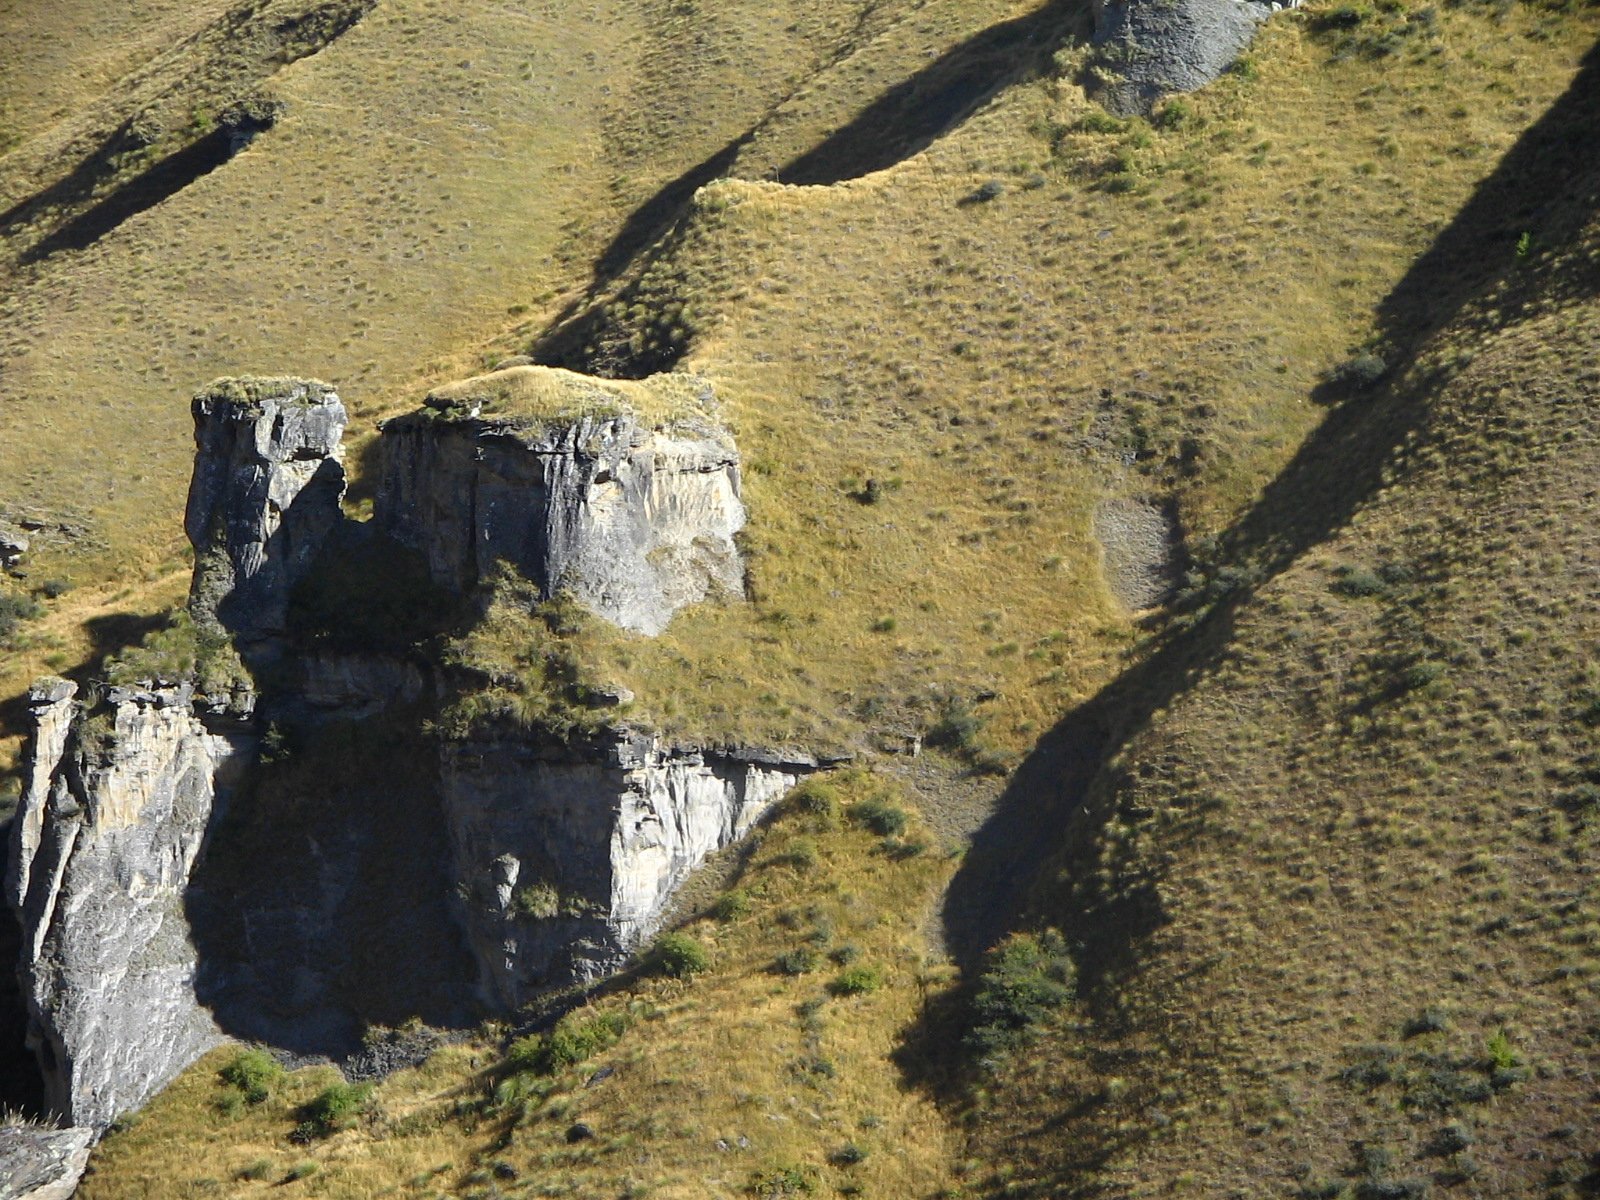 an aerial view of two mountain - side cliffs, some shaped like animals